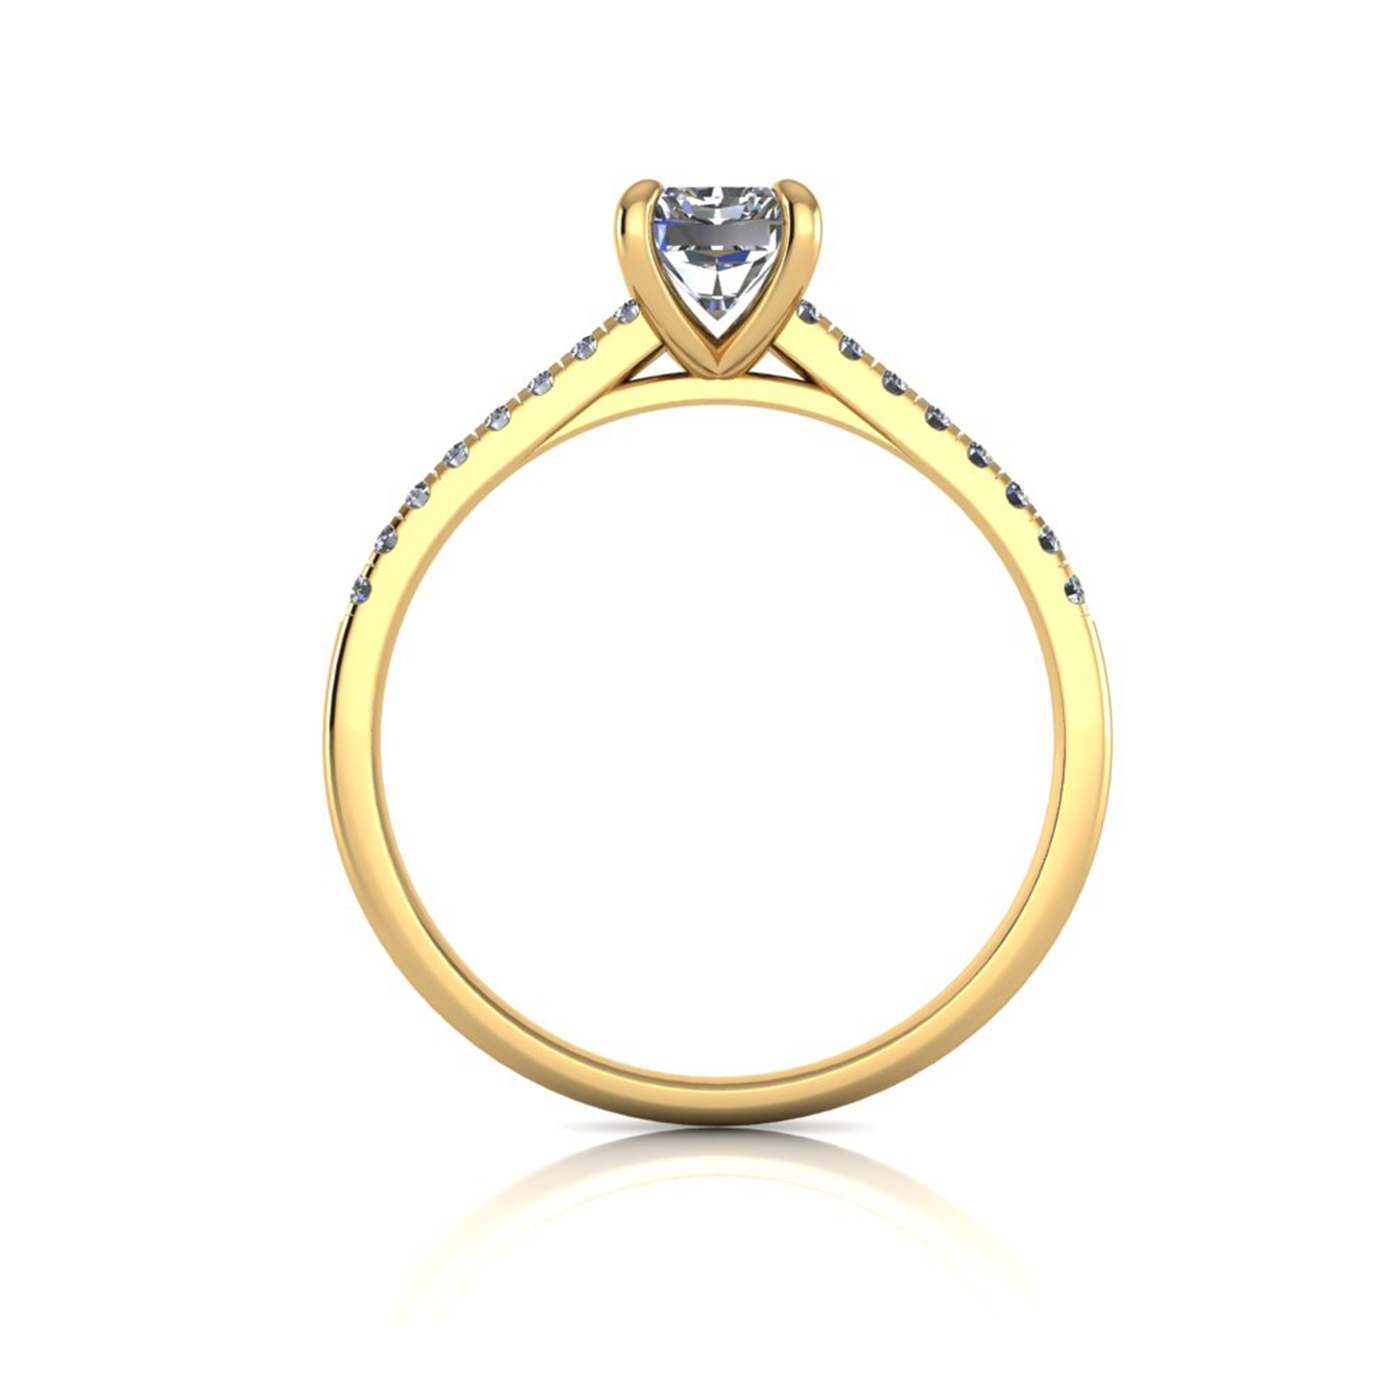 18k yellow gold  0,80 ct 4 prongs radiant cut diamond engagement ring with whisper thin pavÉ set band